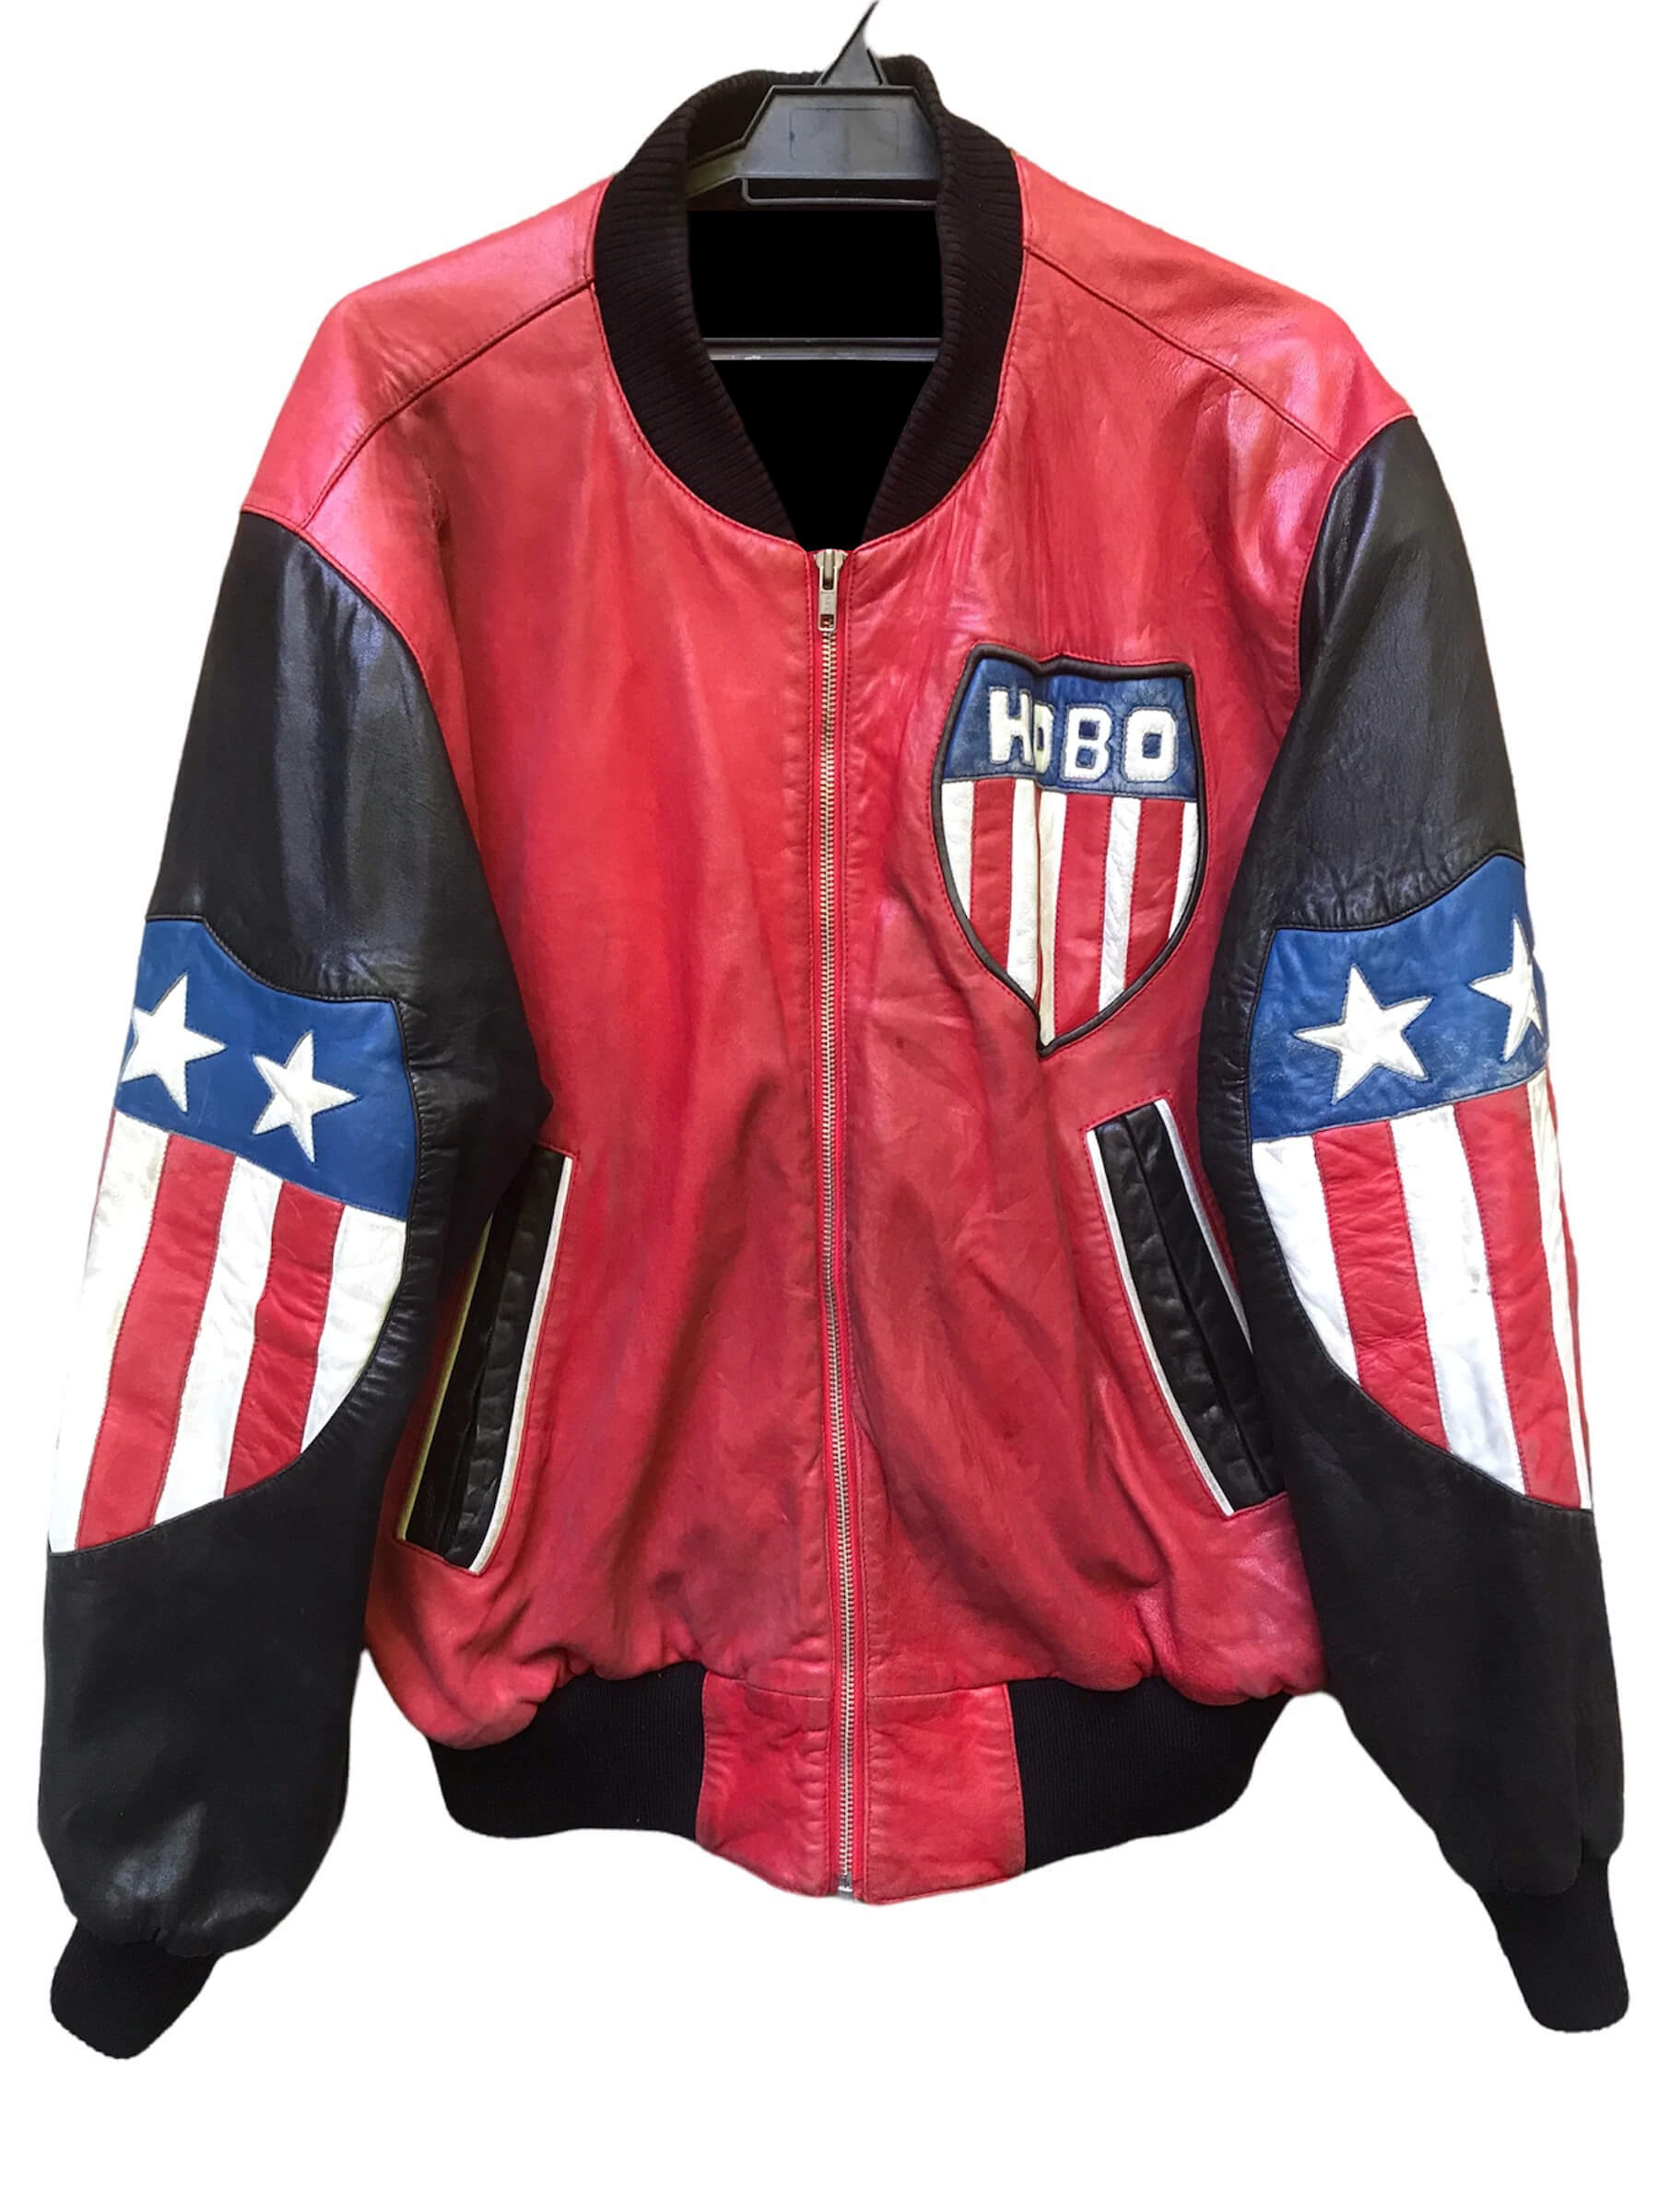 American Leather Trend, Jackets & Coats, The Warriors Movie Leather Vest  Jacket For Bike